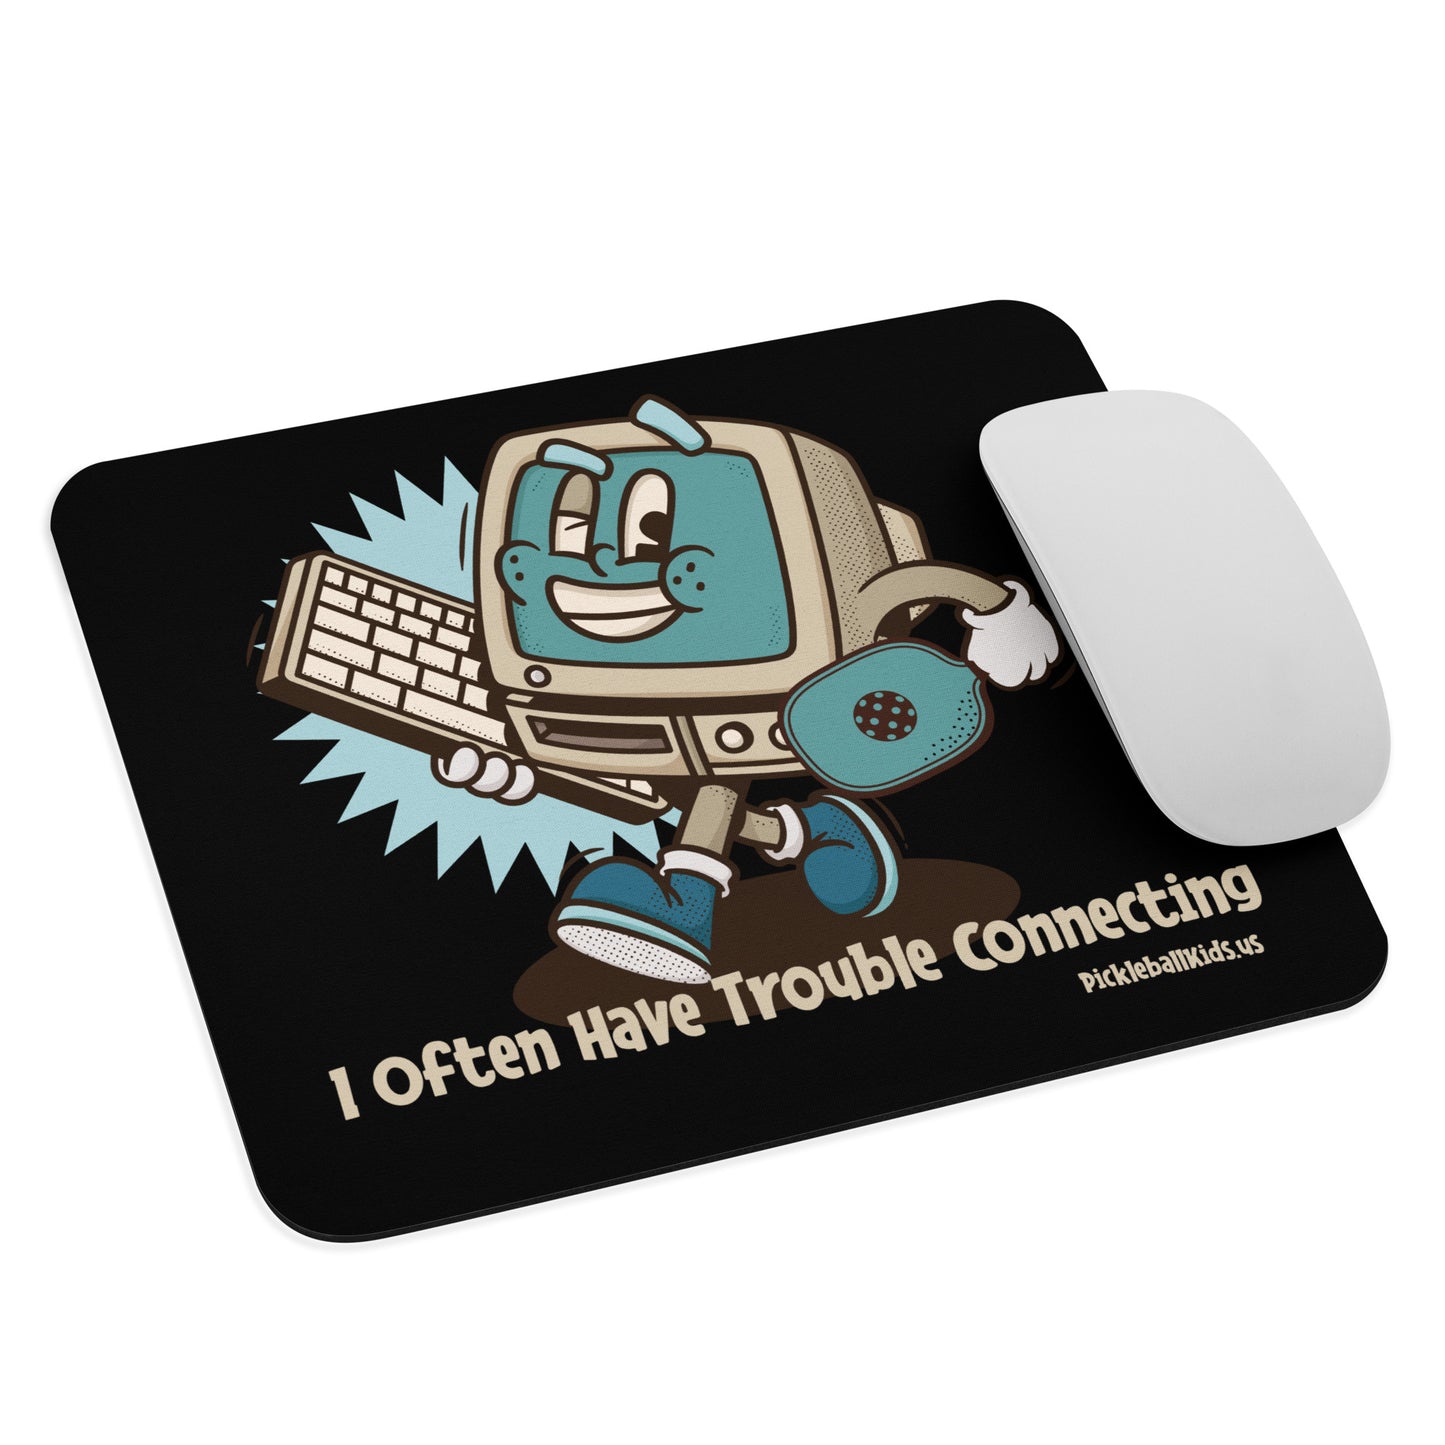 Fun Pickleball Pun: "I Often Have Trouble Connecting," Standard Mouse Pad